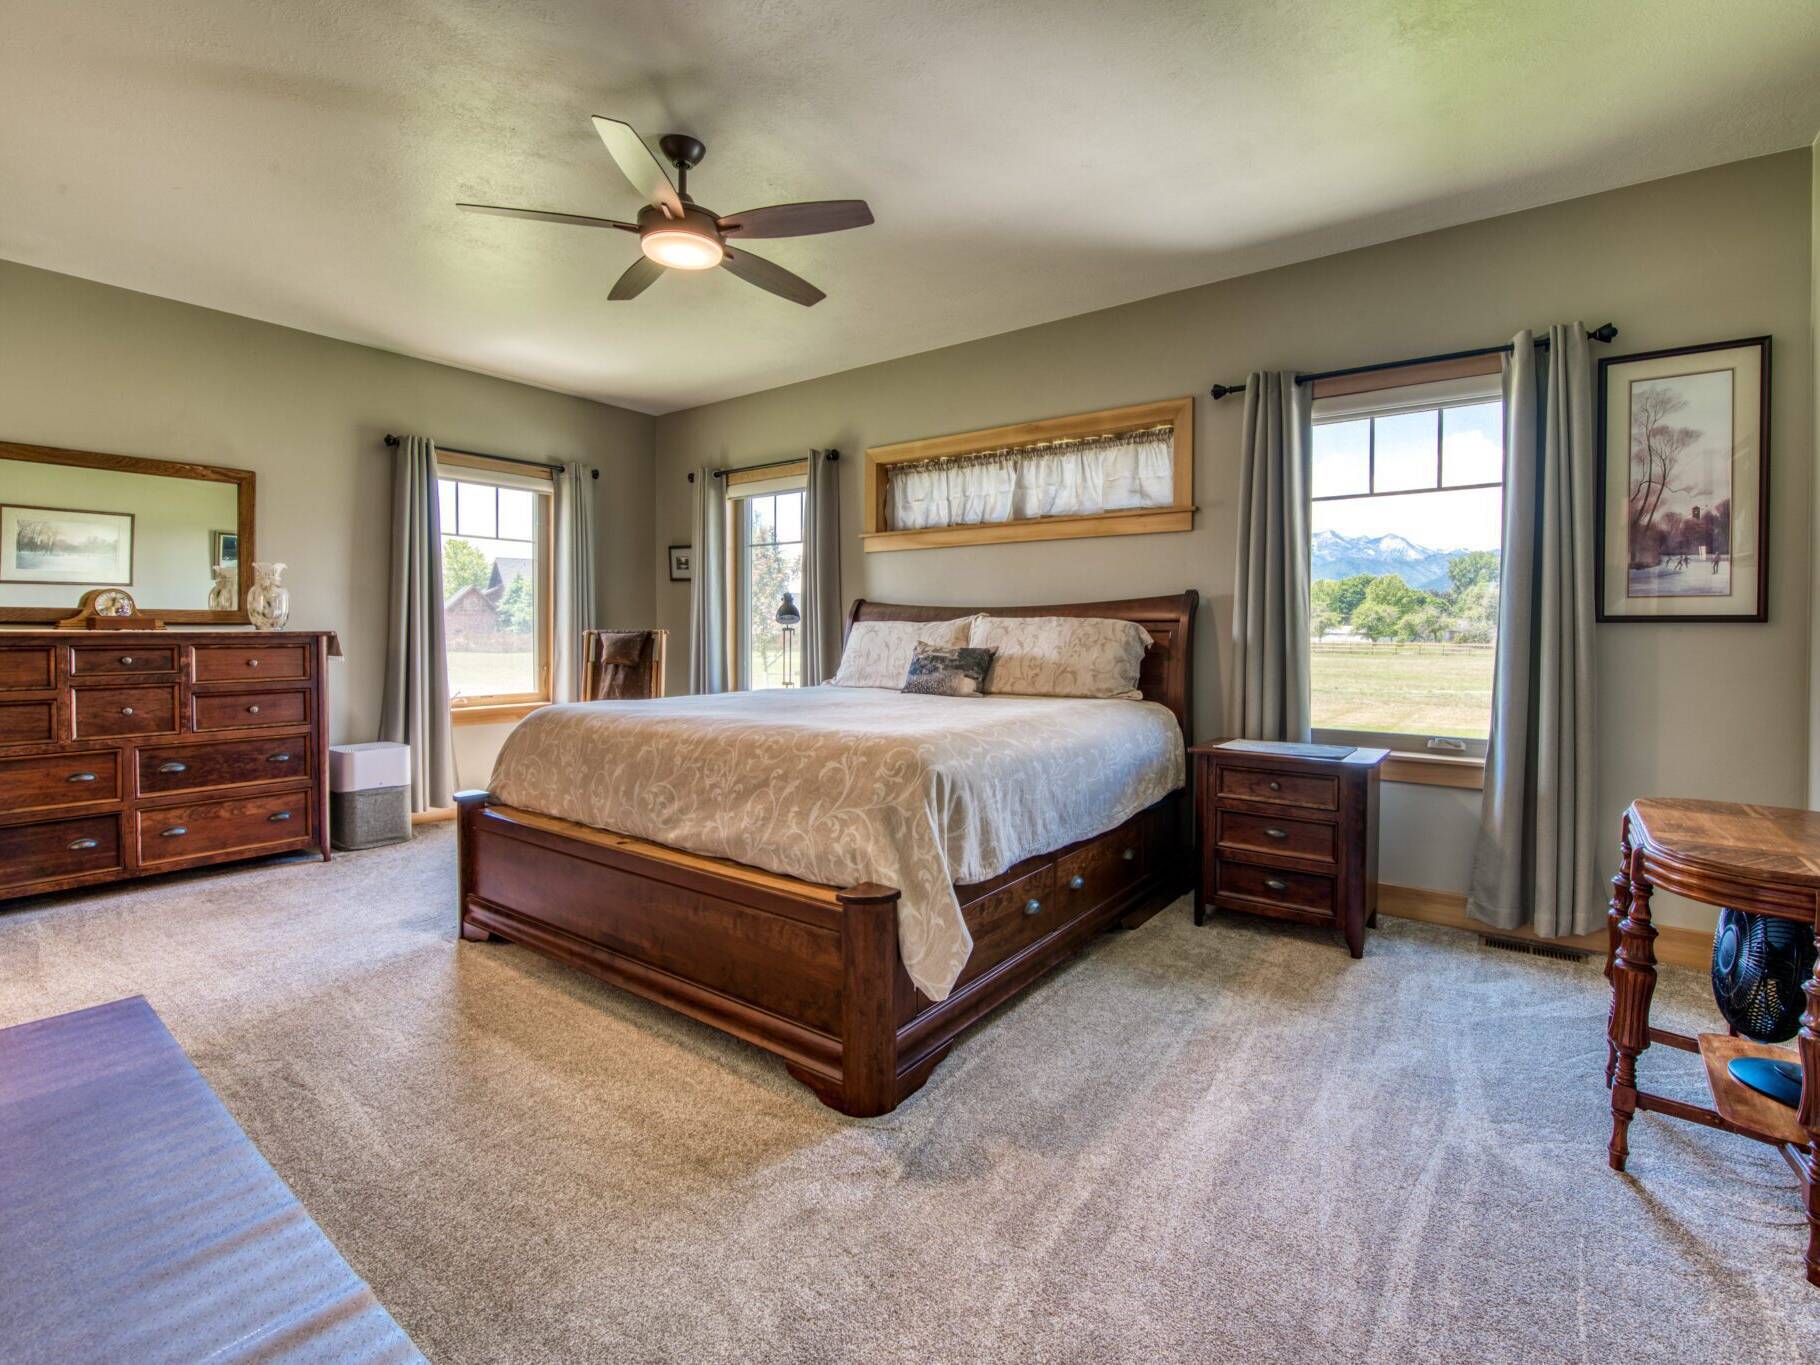 Master bedroom with carpet flooring, wood trim and doors in a custom home near Hamilton, MT.